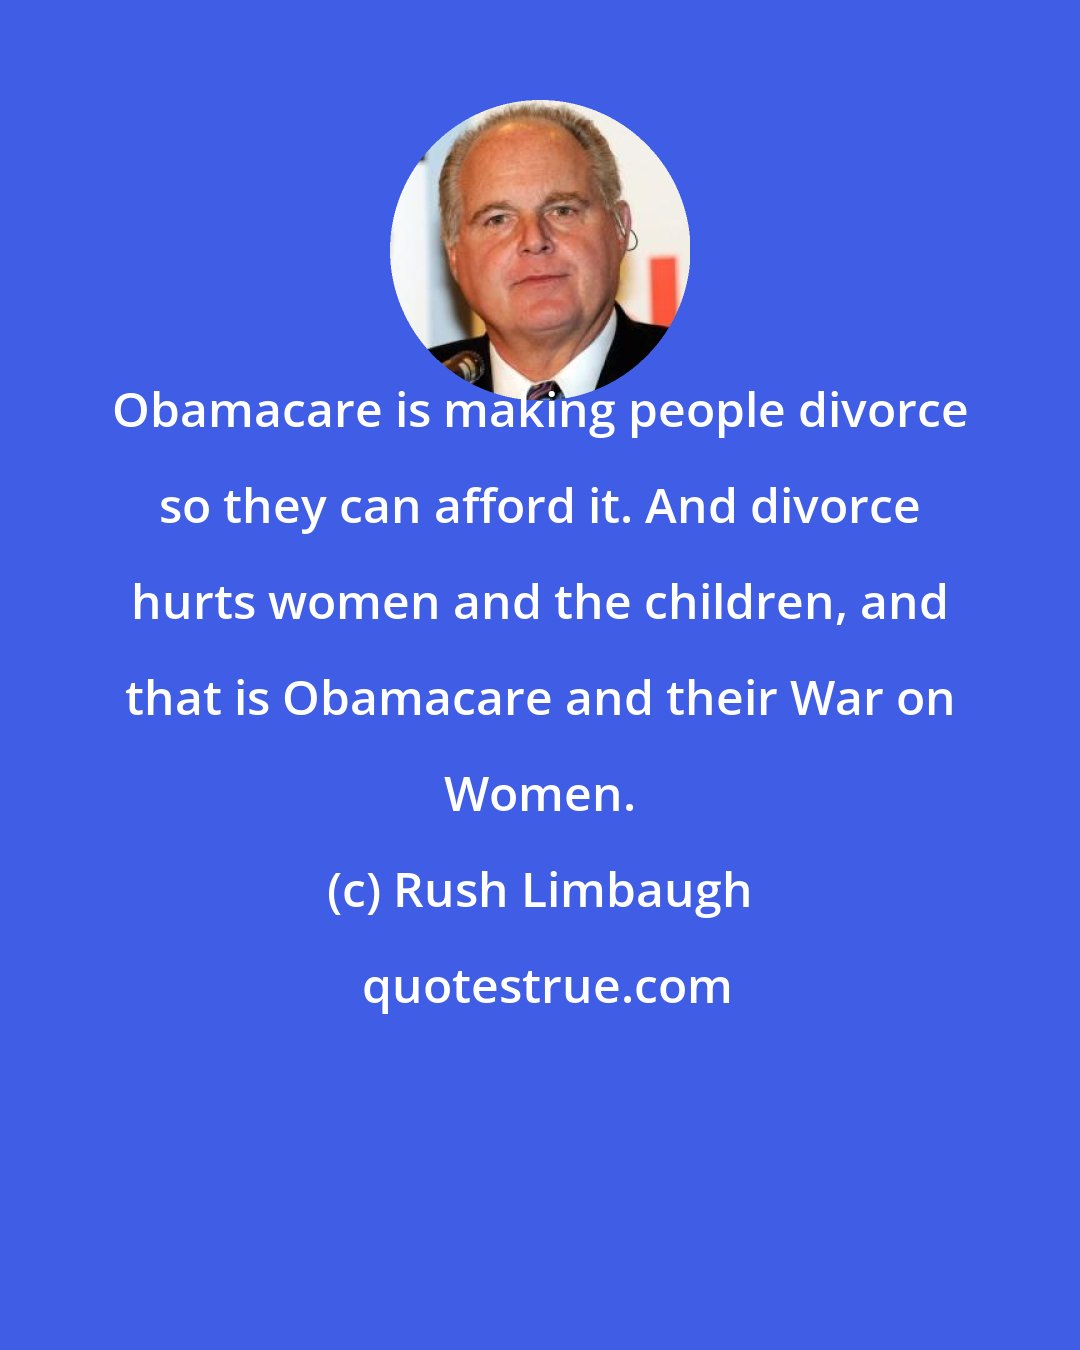 Rush Limbaugh: Obamacare is making people divorce so they can afford it. And divorce hurts women and the children, and that is Obamacare and their War on Women.